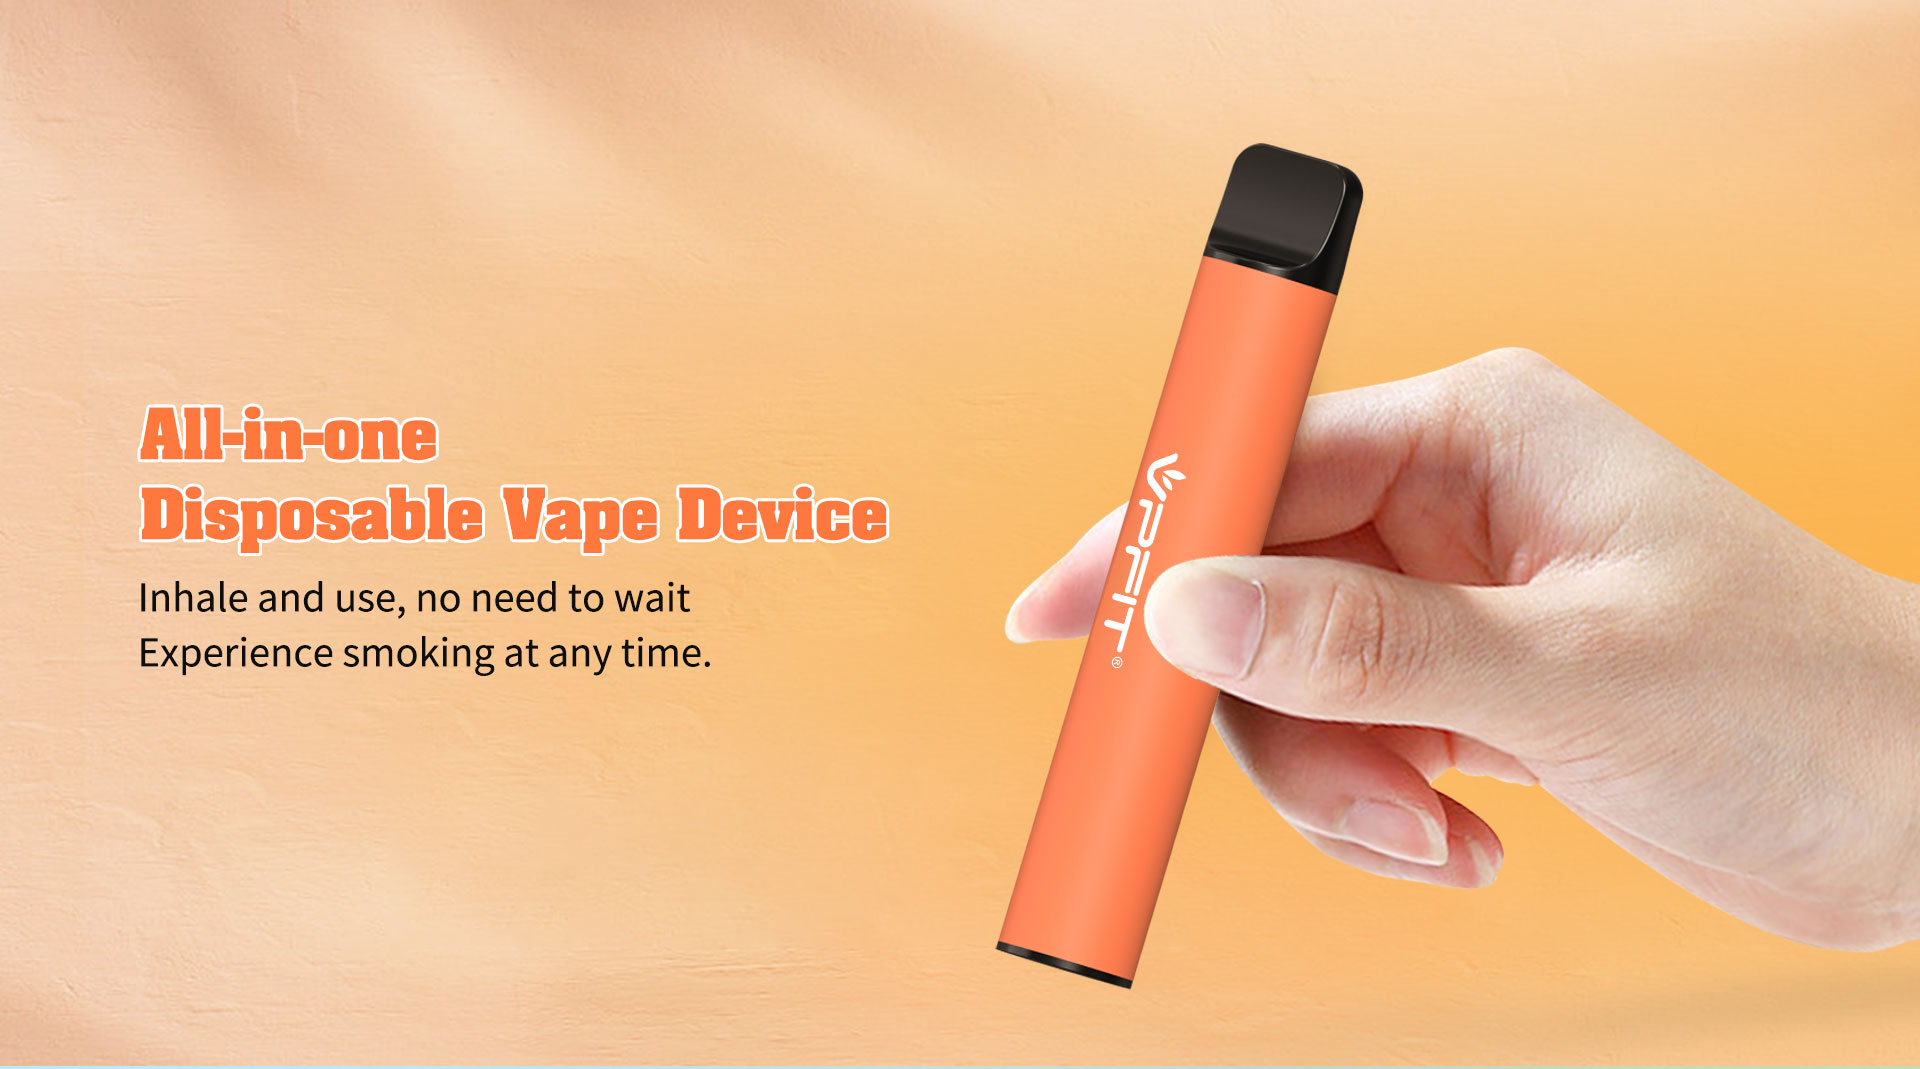 All-in-one Disposable Vape Device